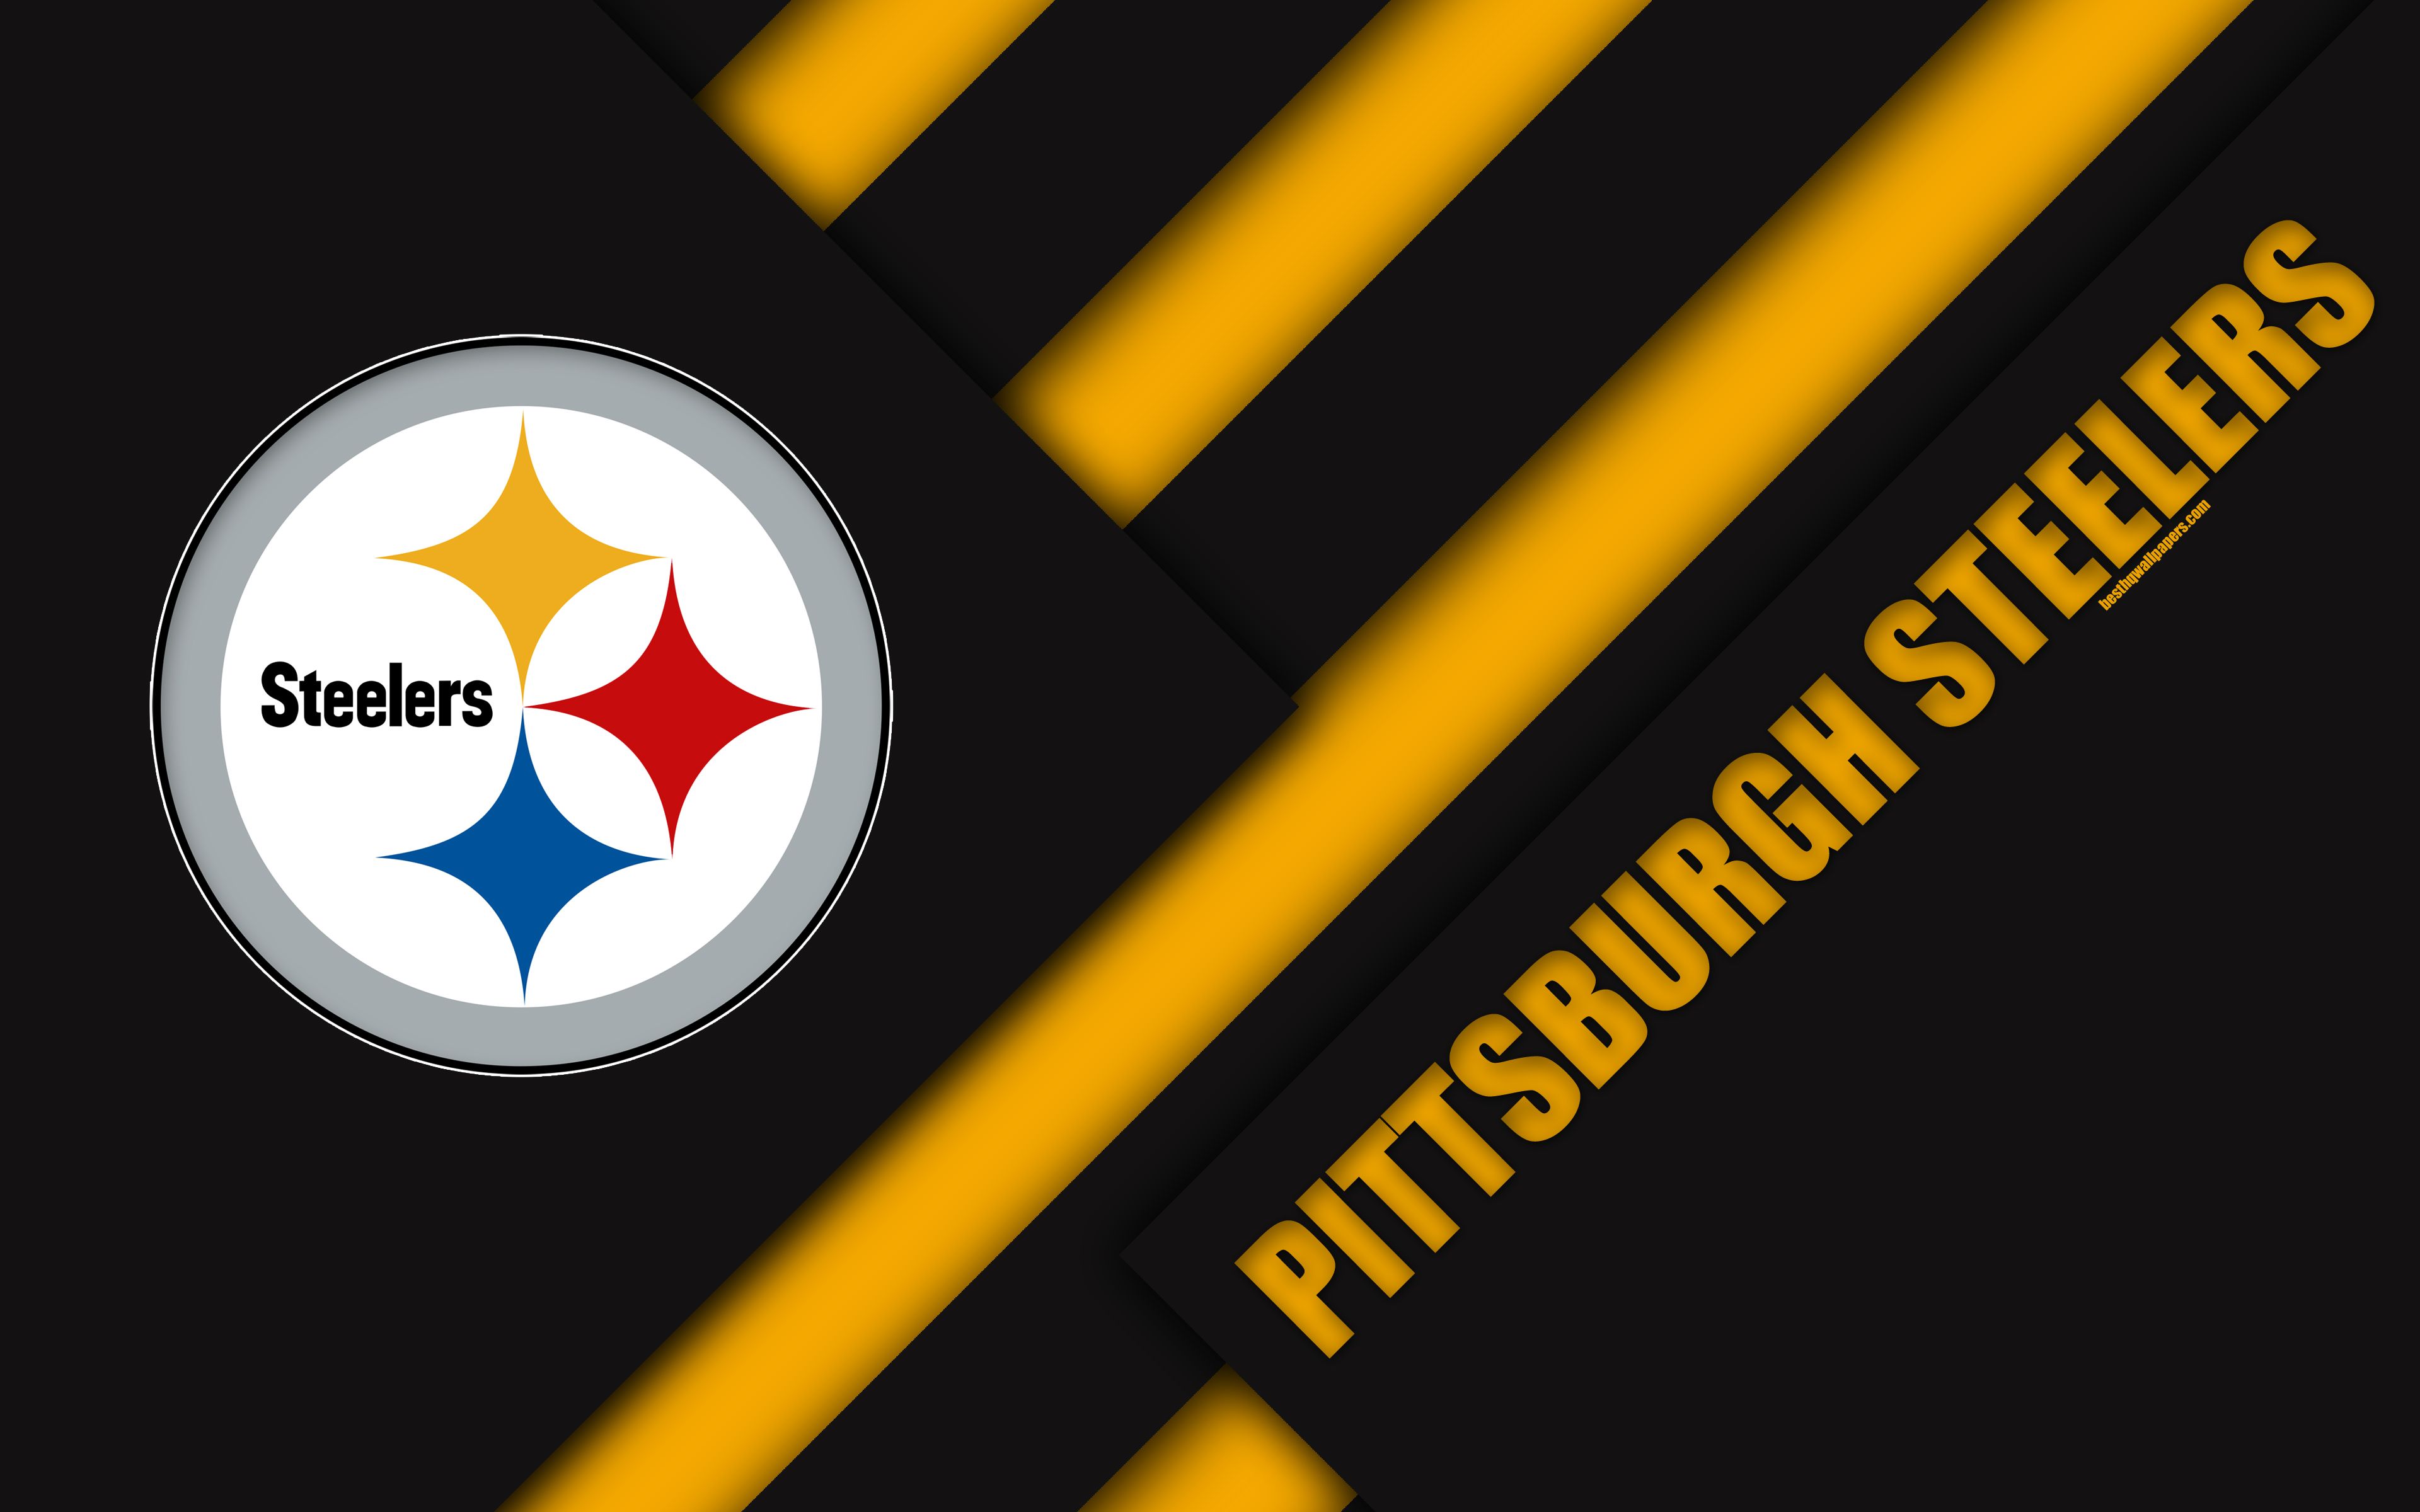 Download wallpaper Pittsburgh Steelers, 4k, AFC North, logo, NFL, black yellow abstraction, material design, American football, Pittsburgh, Pennsylvania, USA, National Football League for desktop with resolution 3840x2400. High Quality HD picture